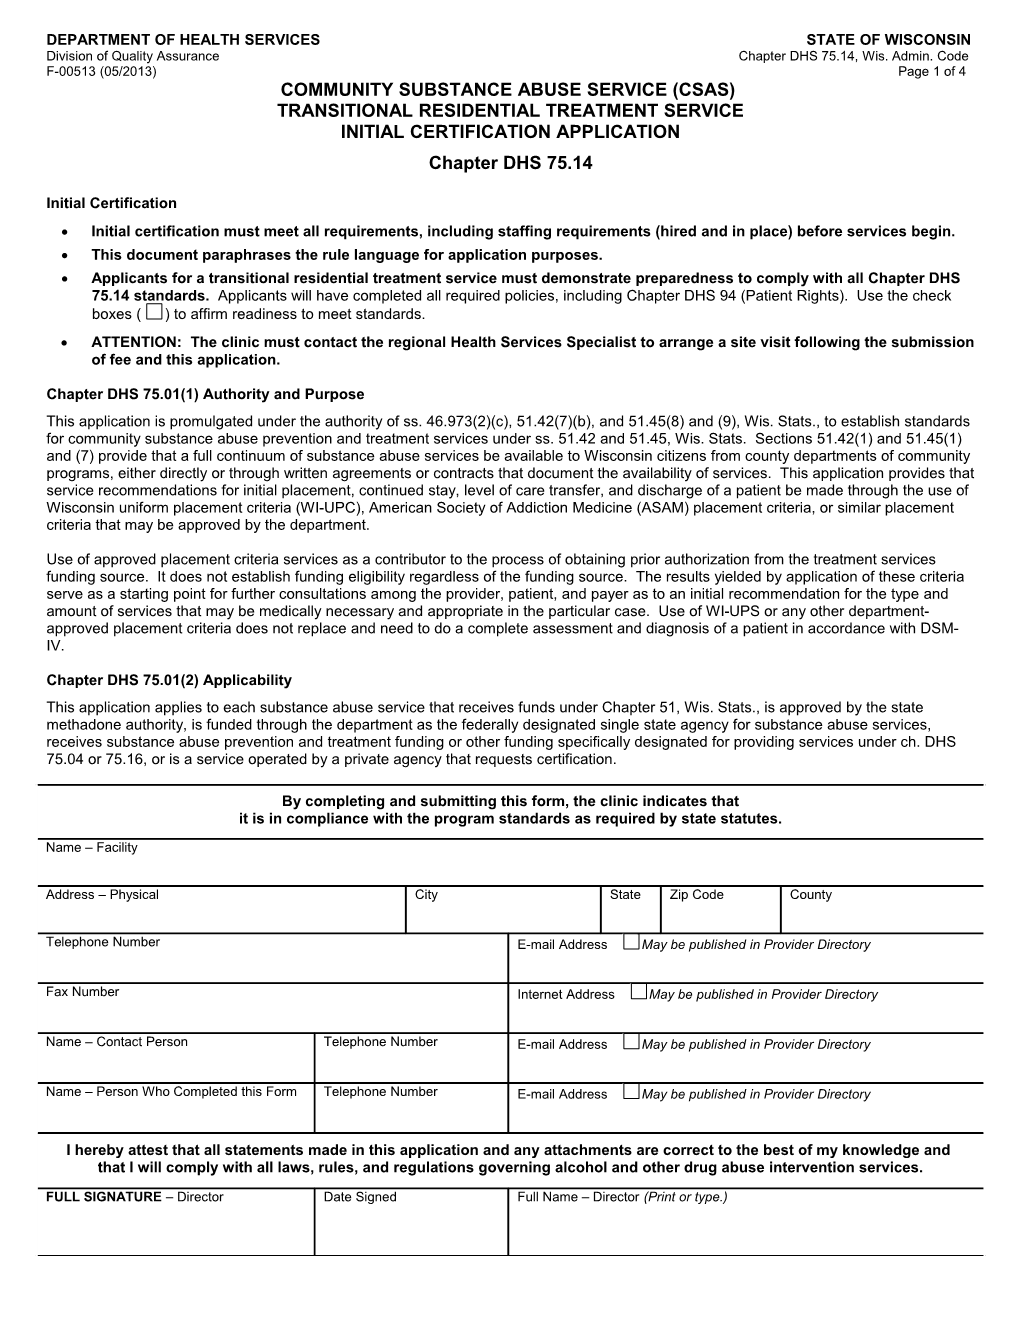 CSAS Transitional Residential Treatment Service Initial Certification Application-DHS 75.14